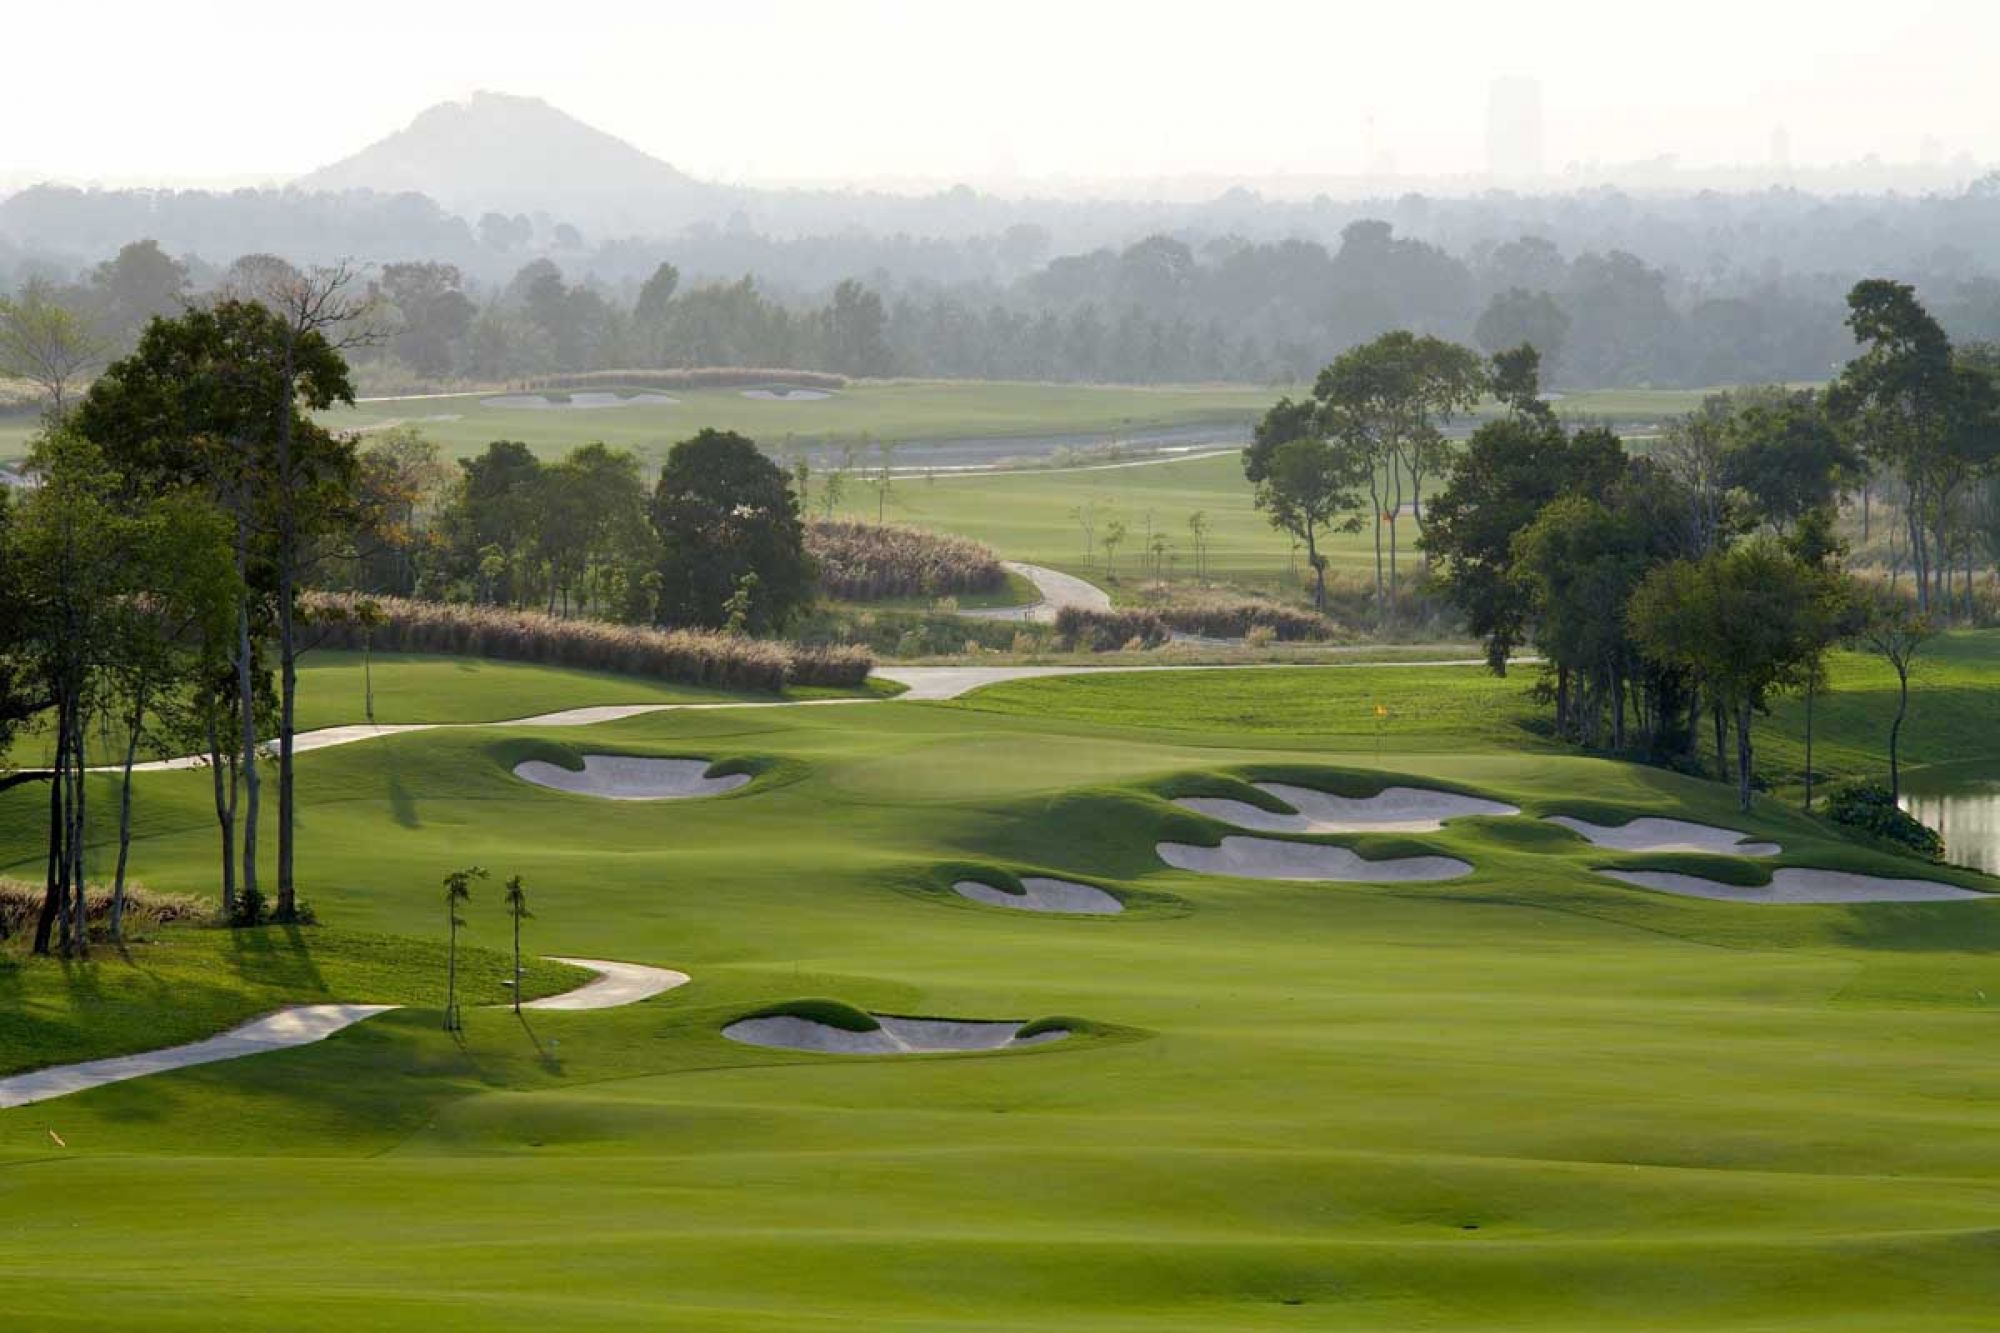 Siam Country Club Plantation Course has several of the most popular golf course near Pattaya